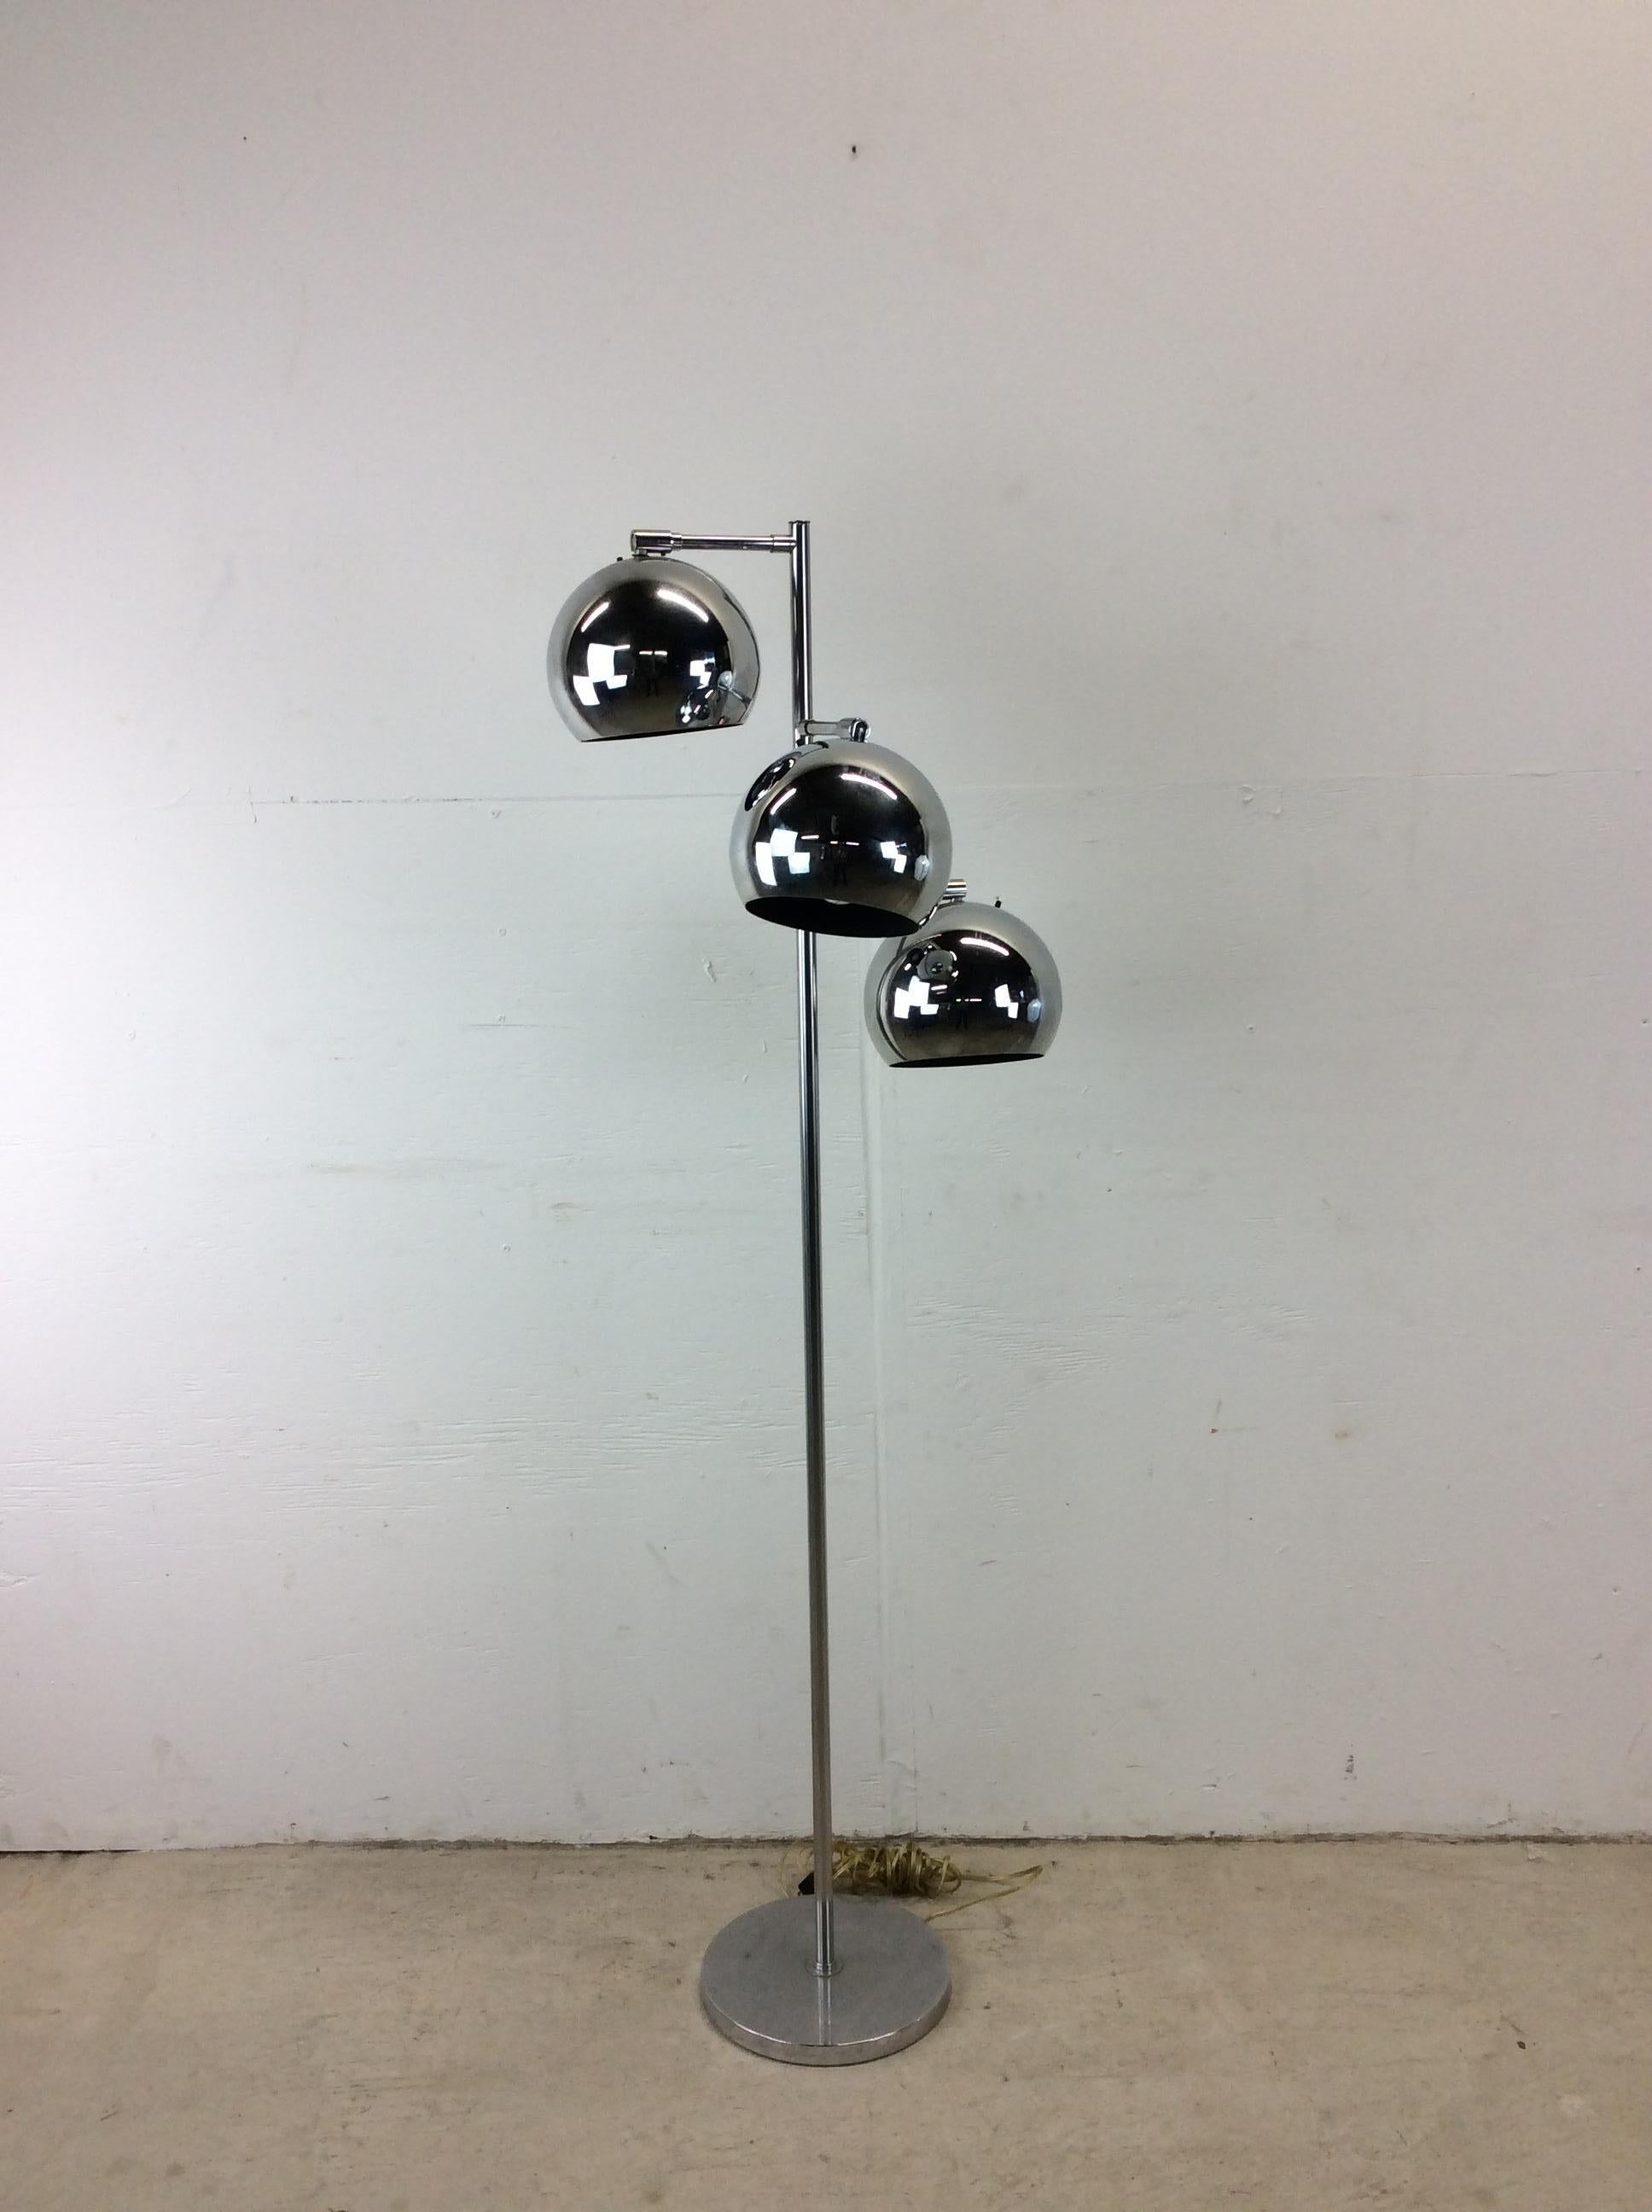 This mid century modern floor lamp by Koch & Lowy features original chrome finish, three adjustable globes with their own switches, fully functional vintage wiring, and round chrome base.

Dimensions: 24w 18d 59h

Condition: Original chrome finish